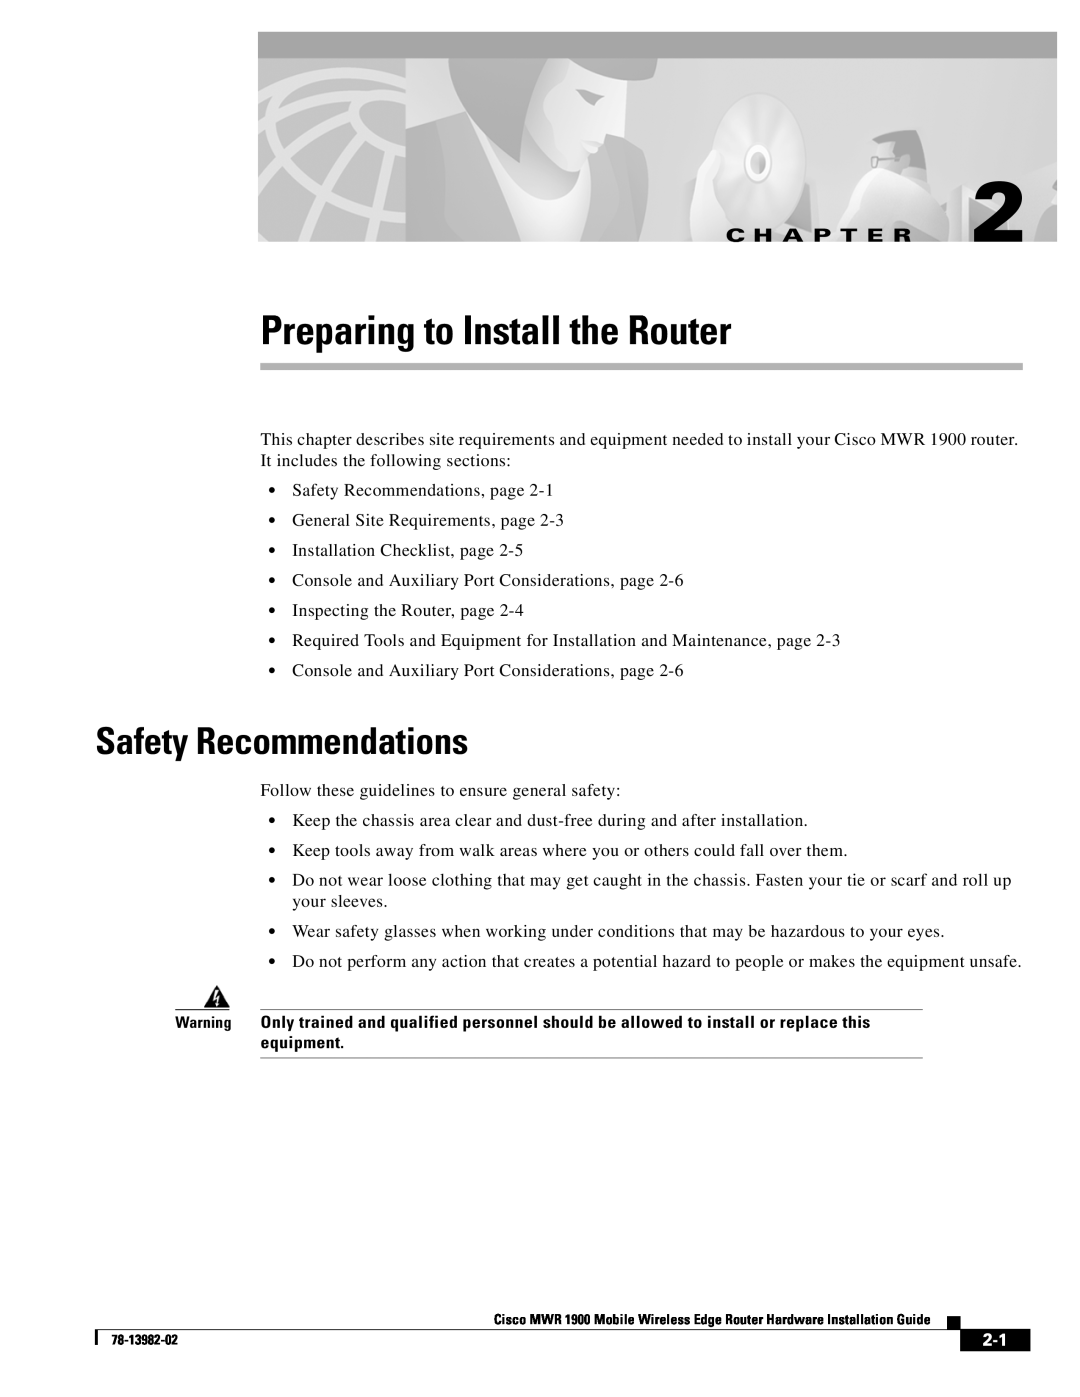 Cisco Systems MWR 1900 manual Preparing to Install the Router, Safety Recommendations, C H A P T E R 